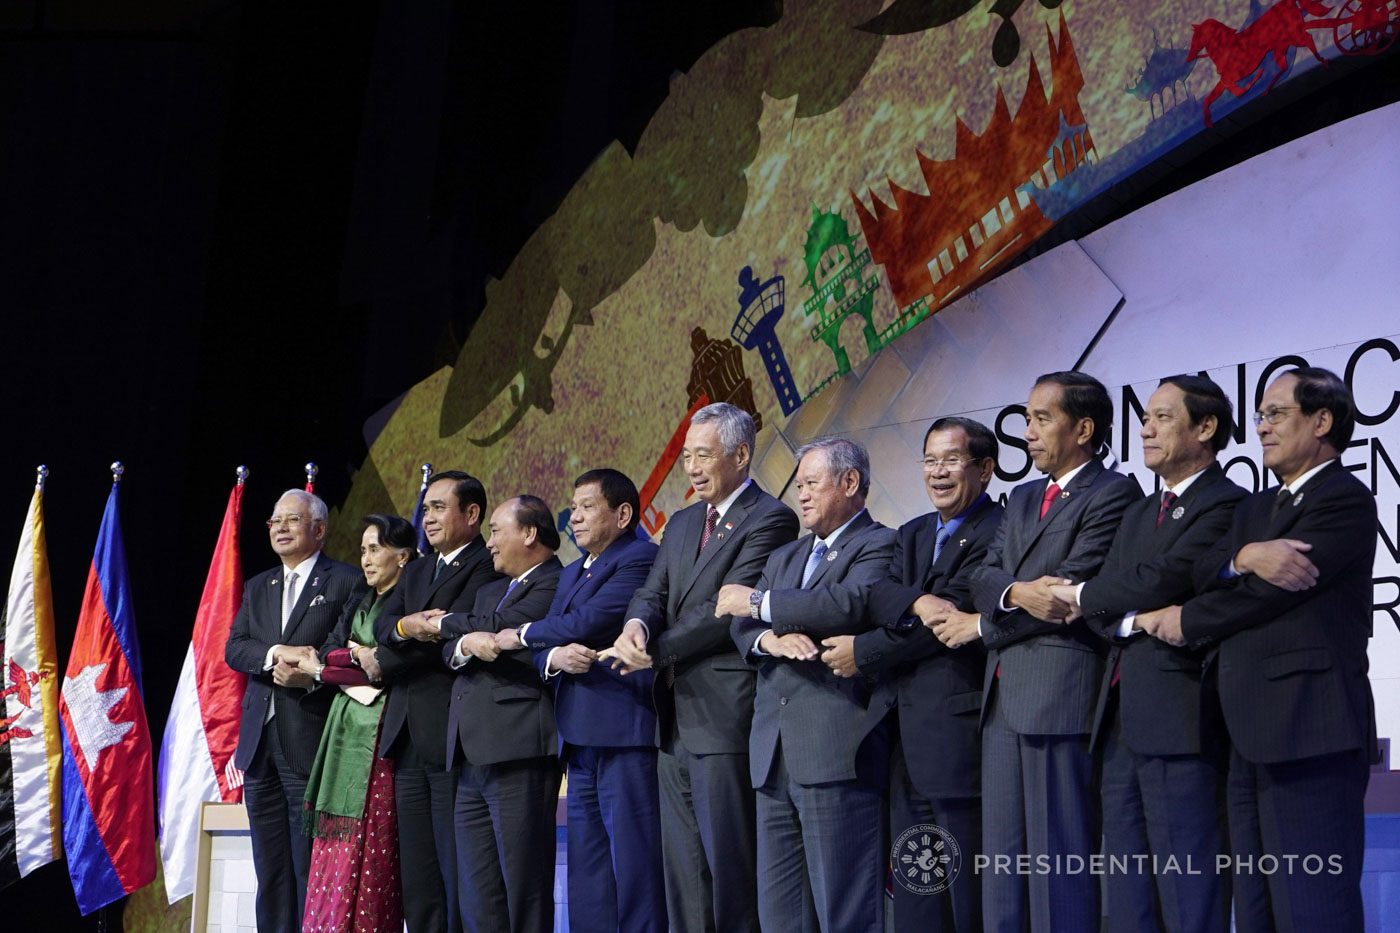 What were the other ASEAN countries up to in Manila?